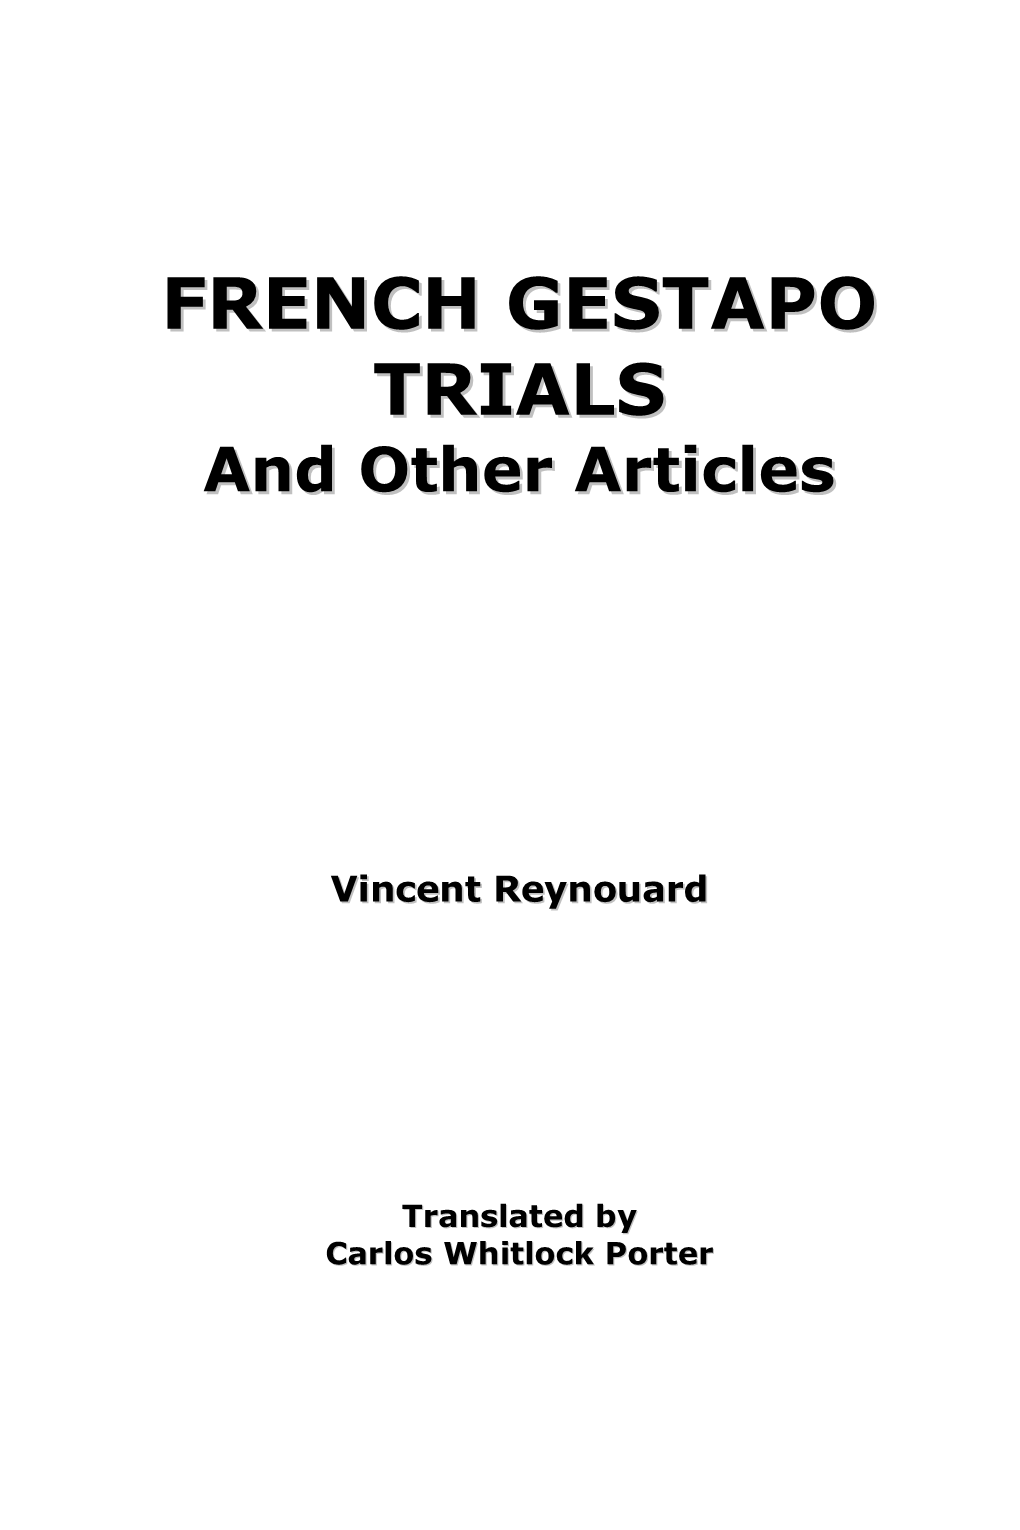 FRENCH GESTAPO TRIALS Vincent Reynouard